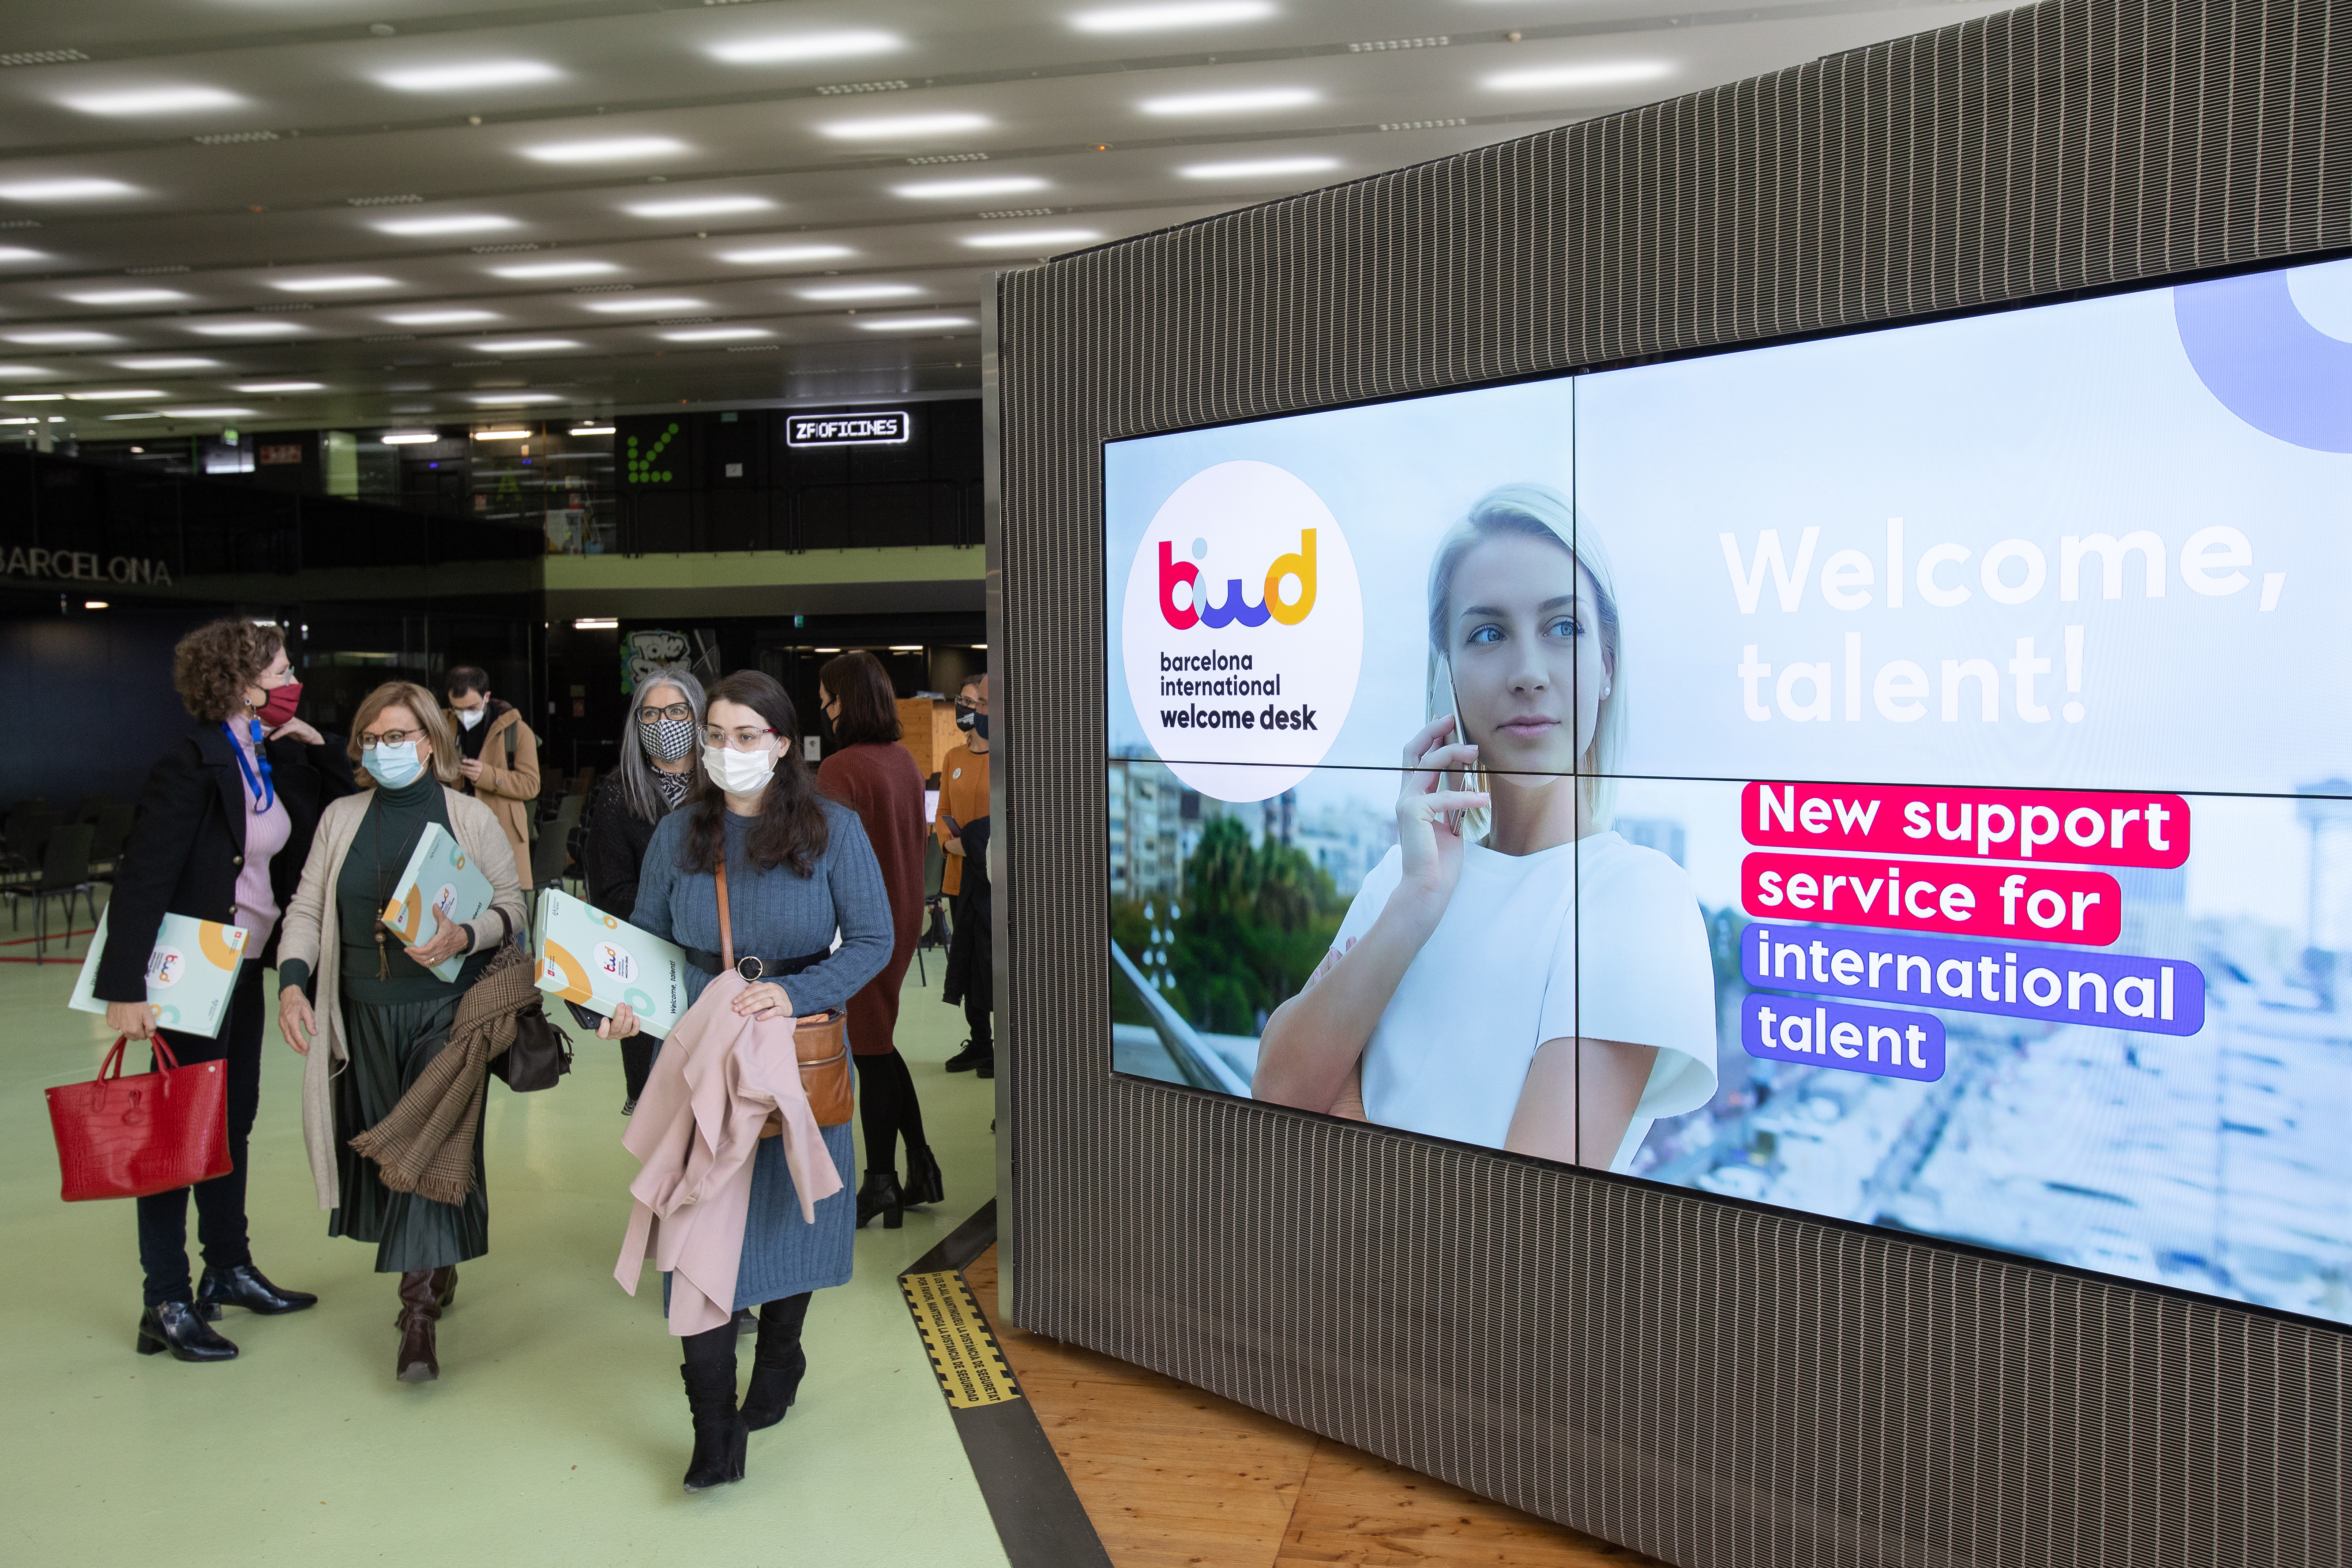 One of the screens with information about the new Barcelona International Welcome Desk office